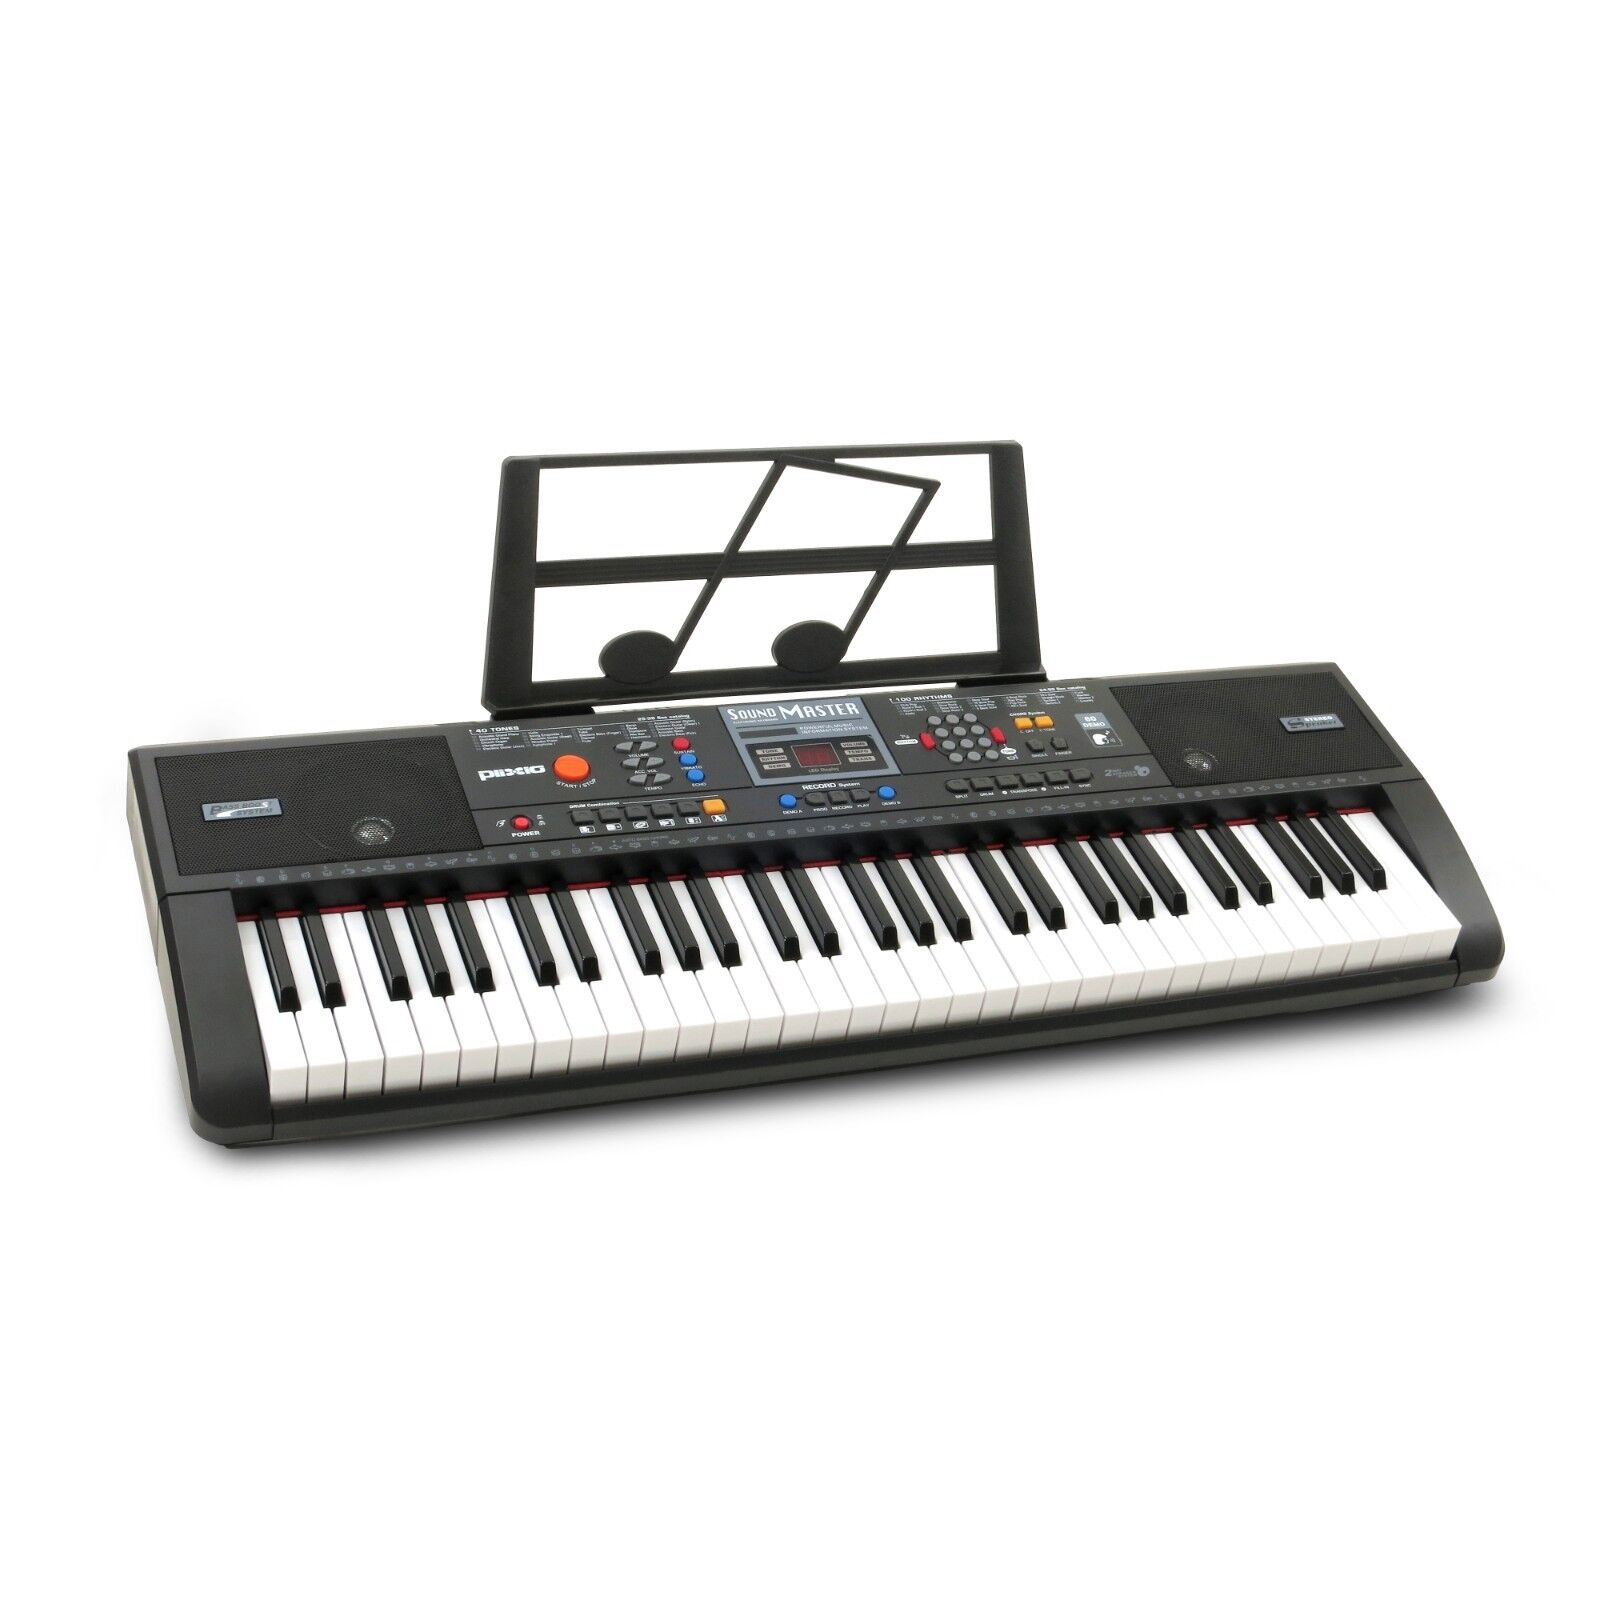 Plixio 61-Key Electric Piano Keyboard with Music Sheet Stand Portable Learners